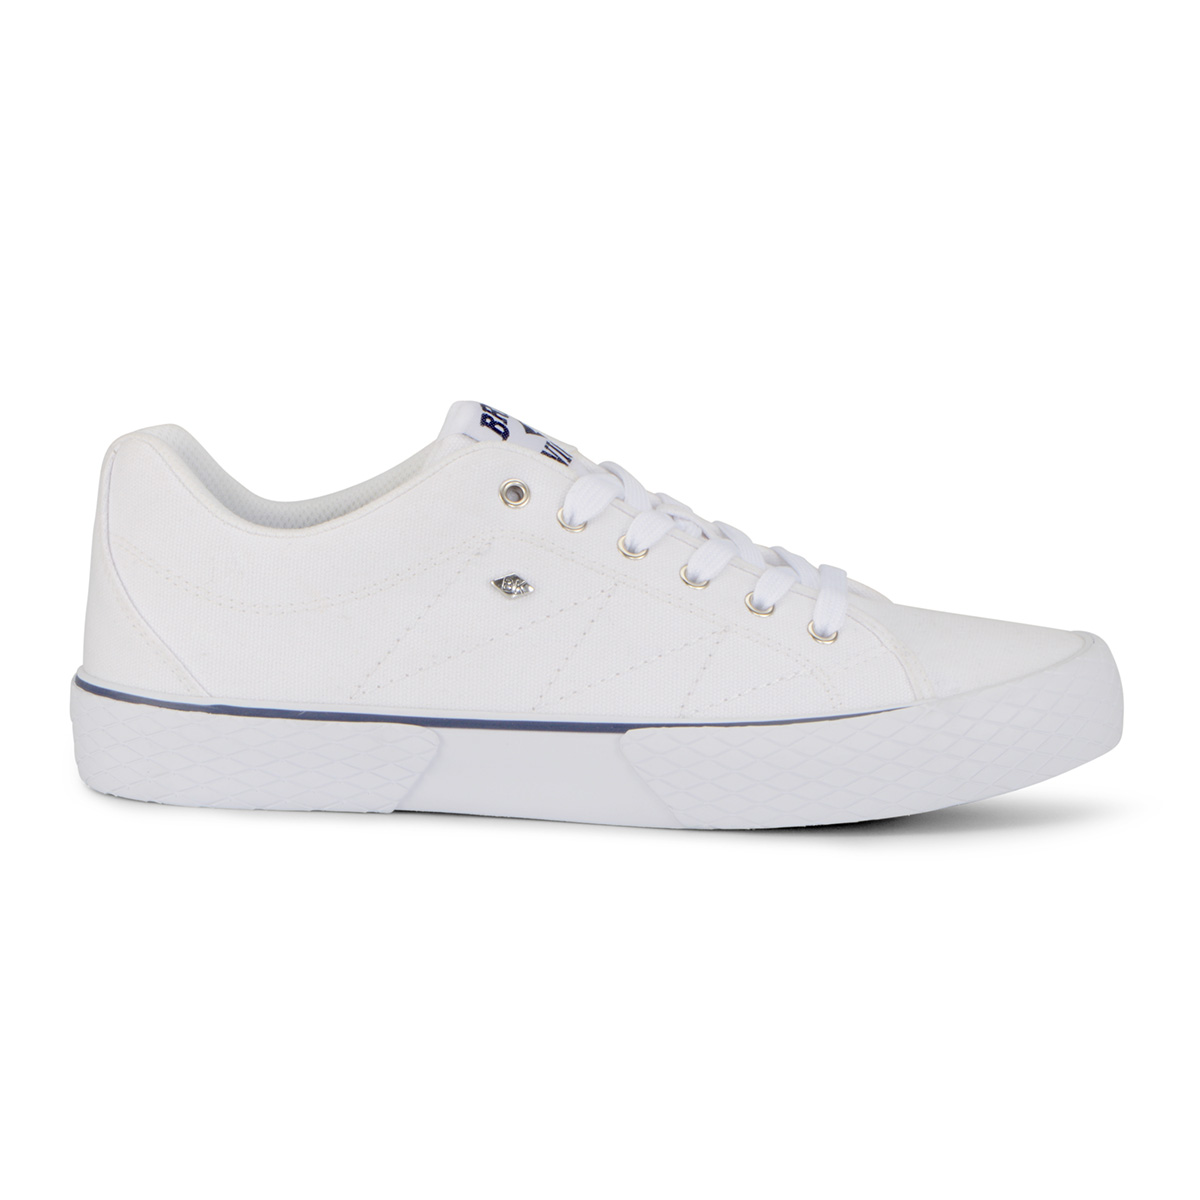 British Knights Men's Vulture 2 Canvas Sneaker Shoes - image 2 of 7